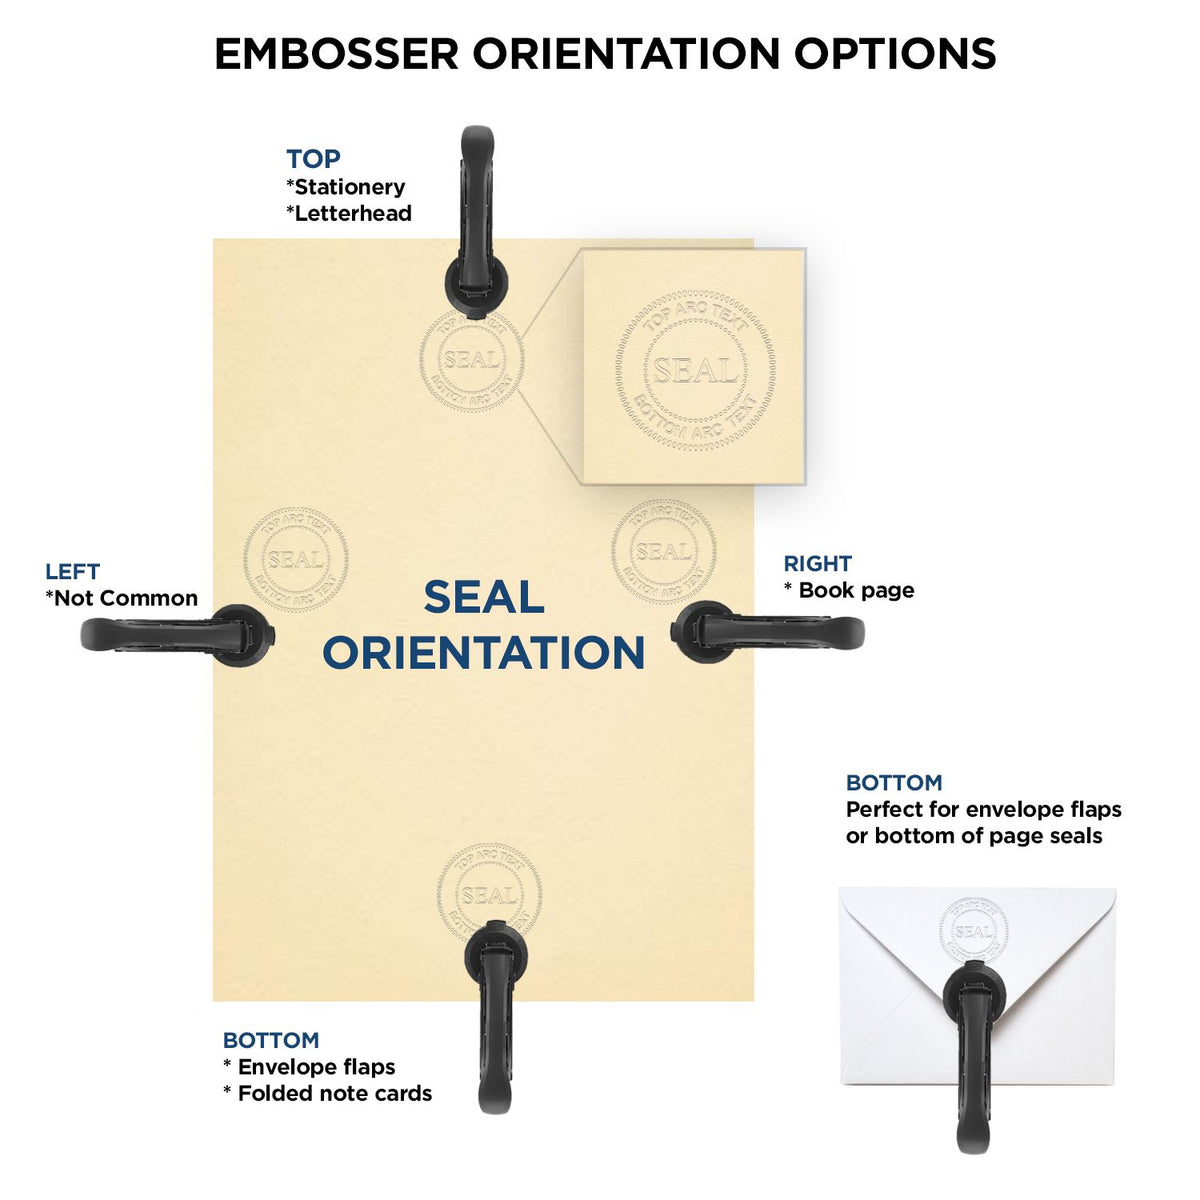 An infographic for the Handheld Kansas Professional Geologist Embosser showing embosser orientation, this is showing examples of a top, bottom, right and left insert.